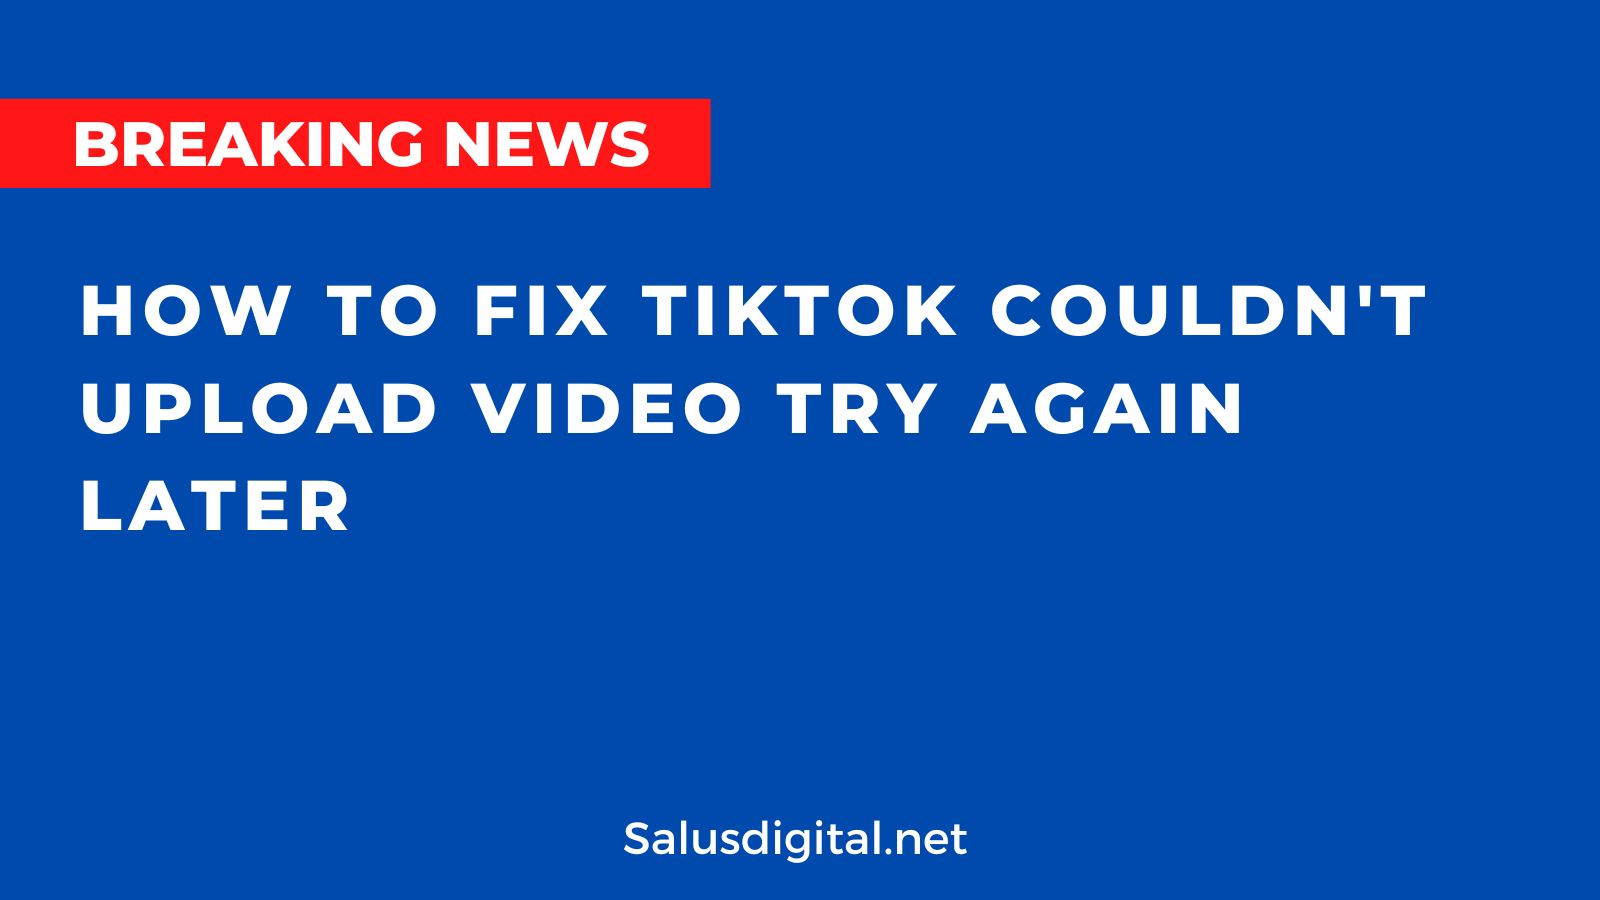 TikTok Couldn't Upload Video Try Again Later